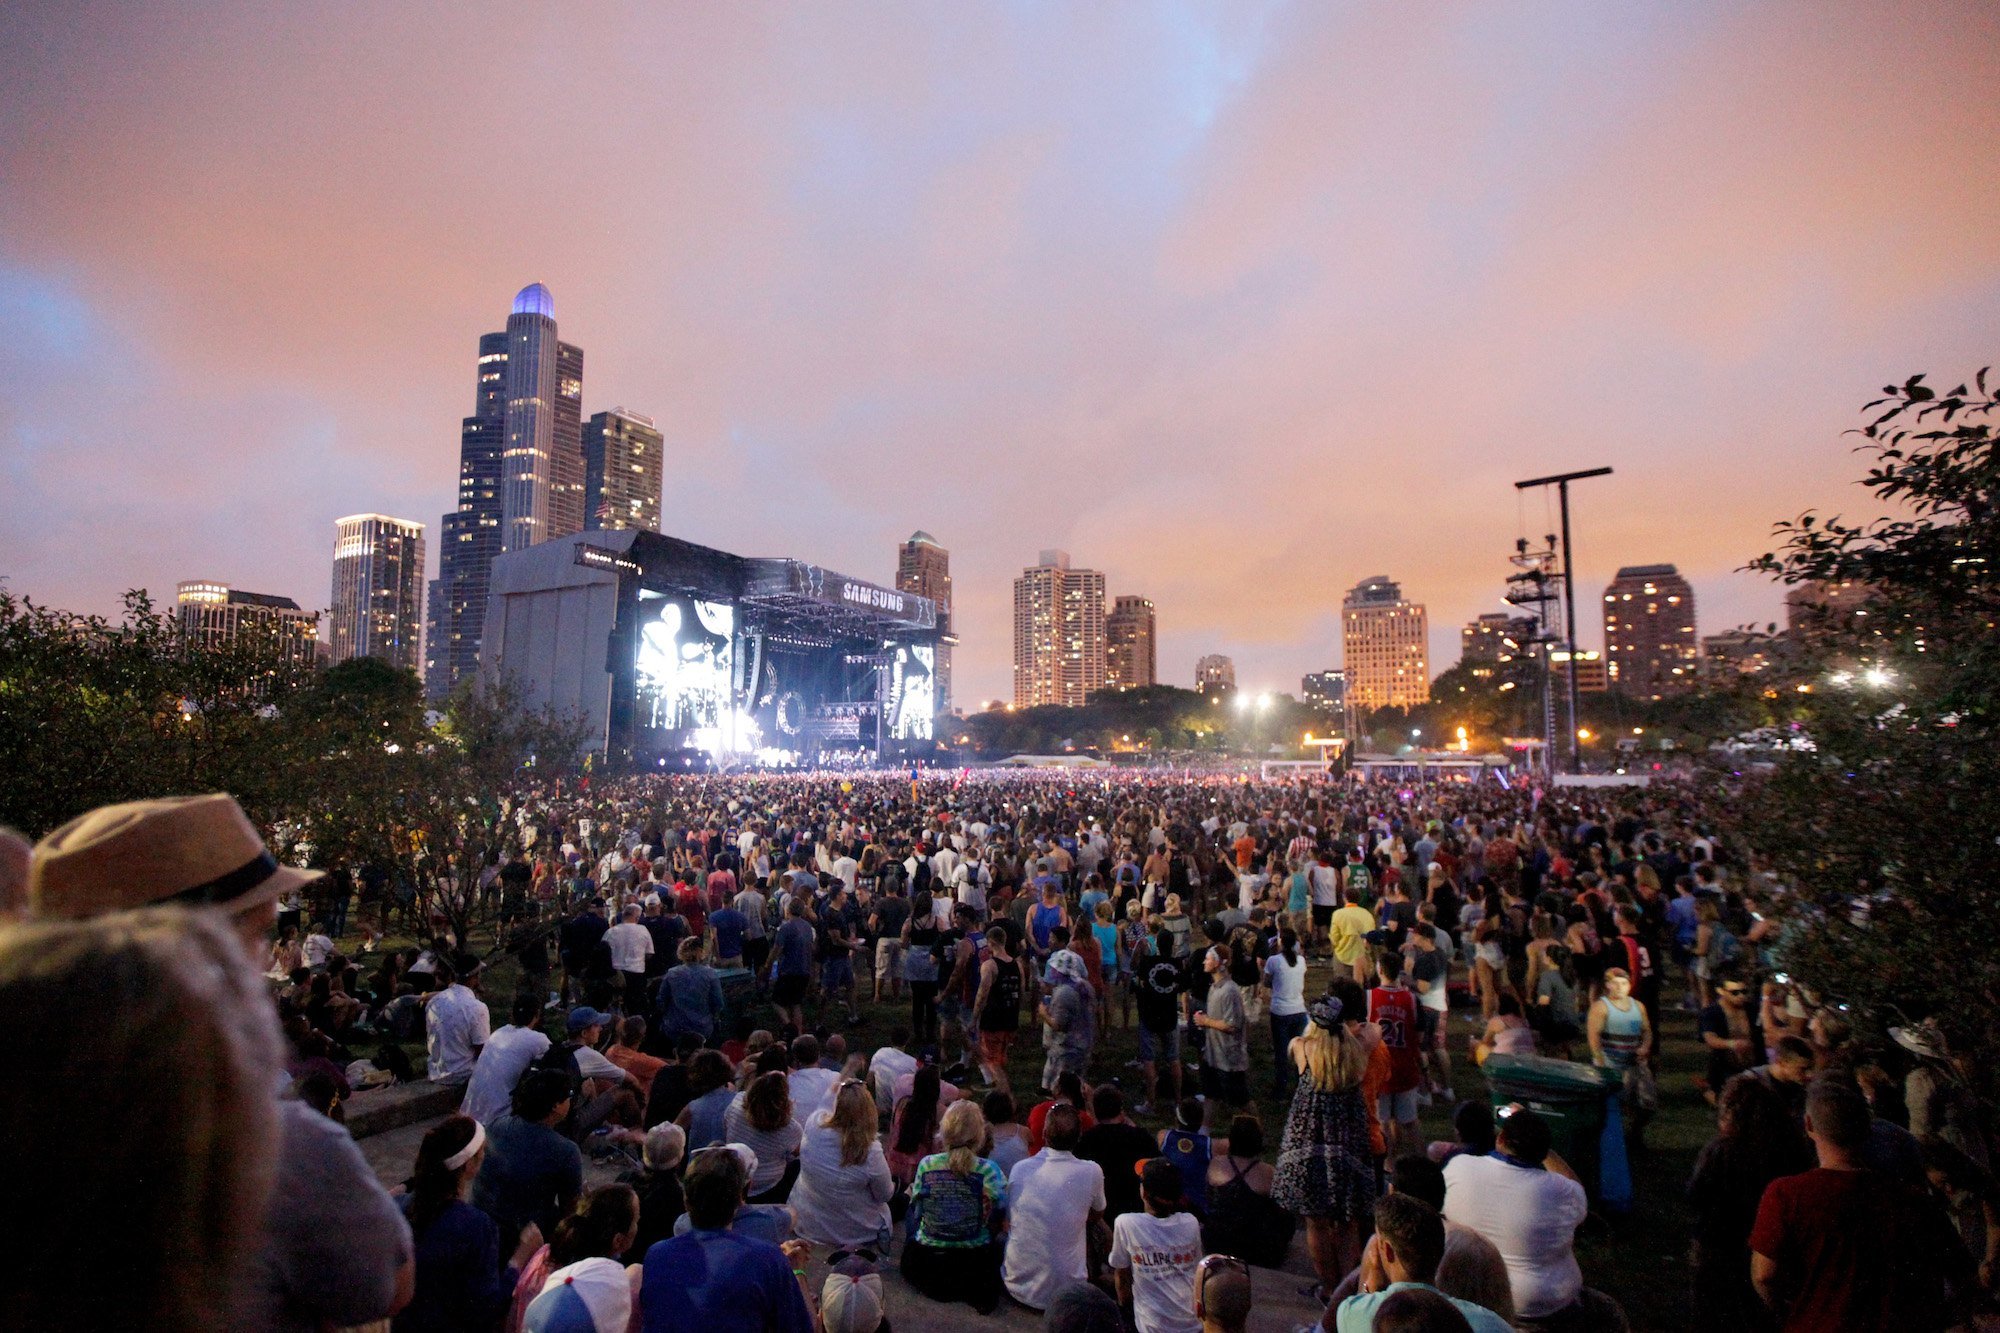 What Is Lollapalooza Like? Everything You Need to Know About the Music Festival